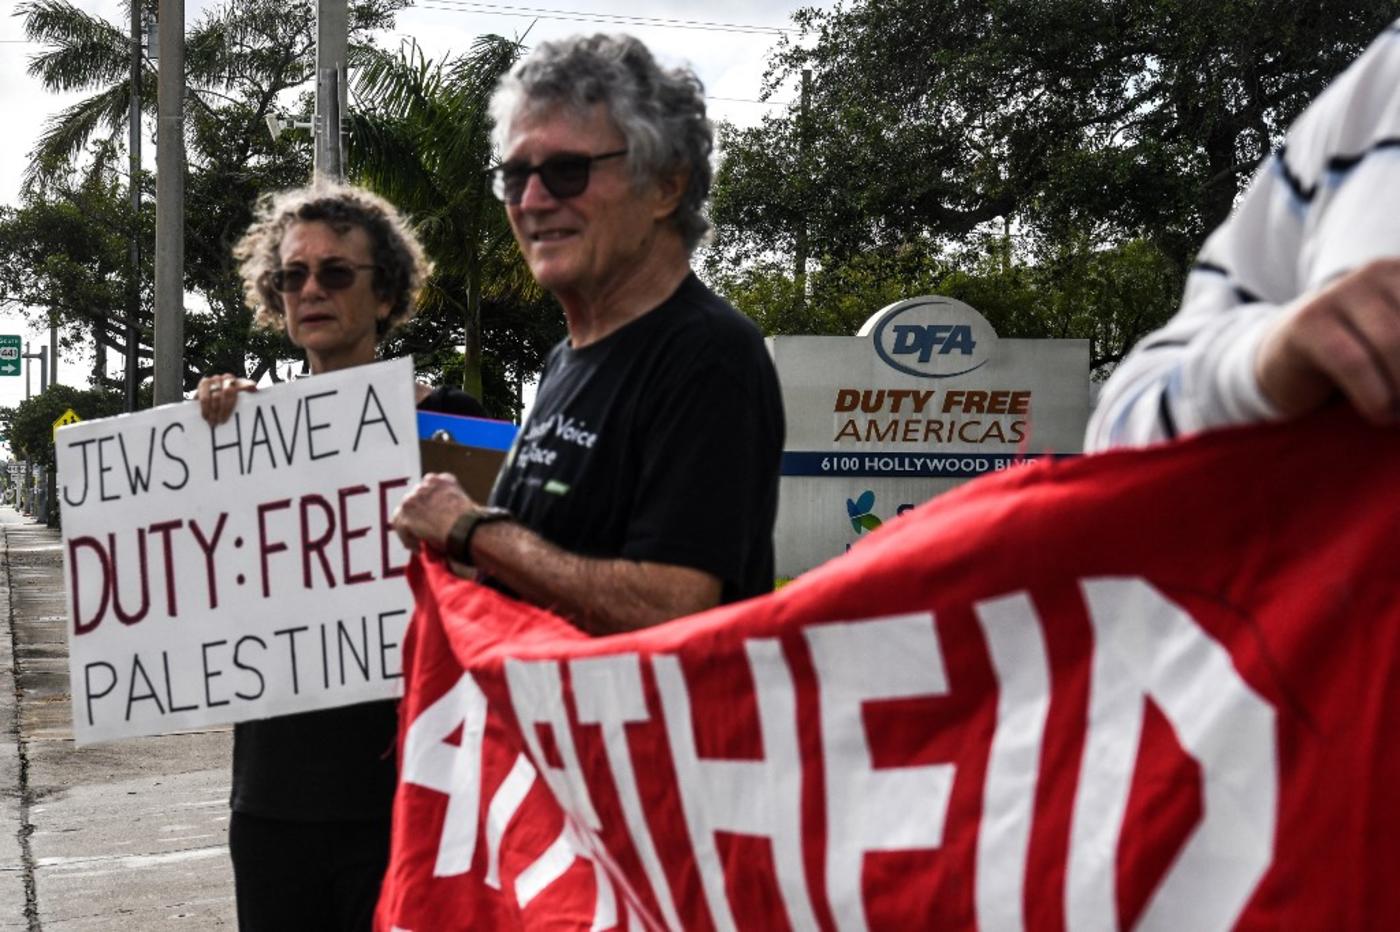 Members of Jewish Voice for Peace hold flags and placards as they protest outside the Duty Free Americas Headquarters in Hollywood, Florida on 2 June 2021.